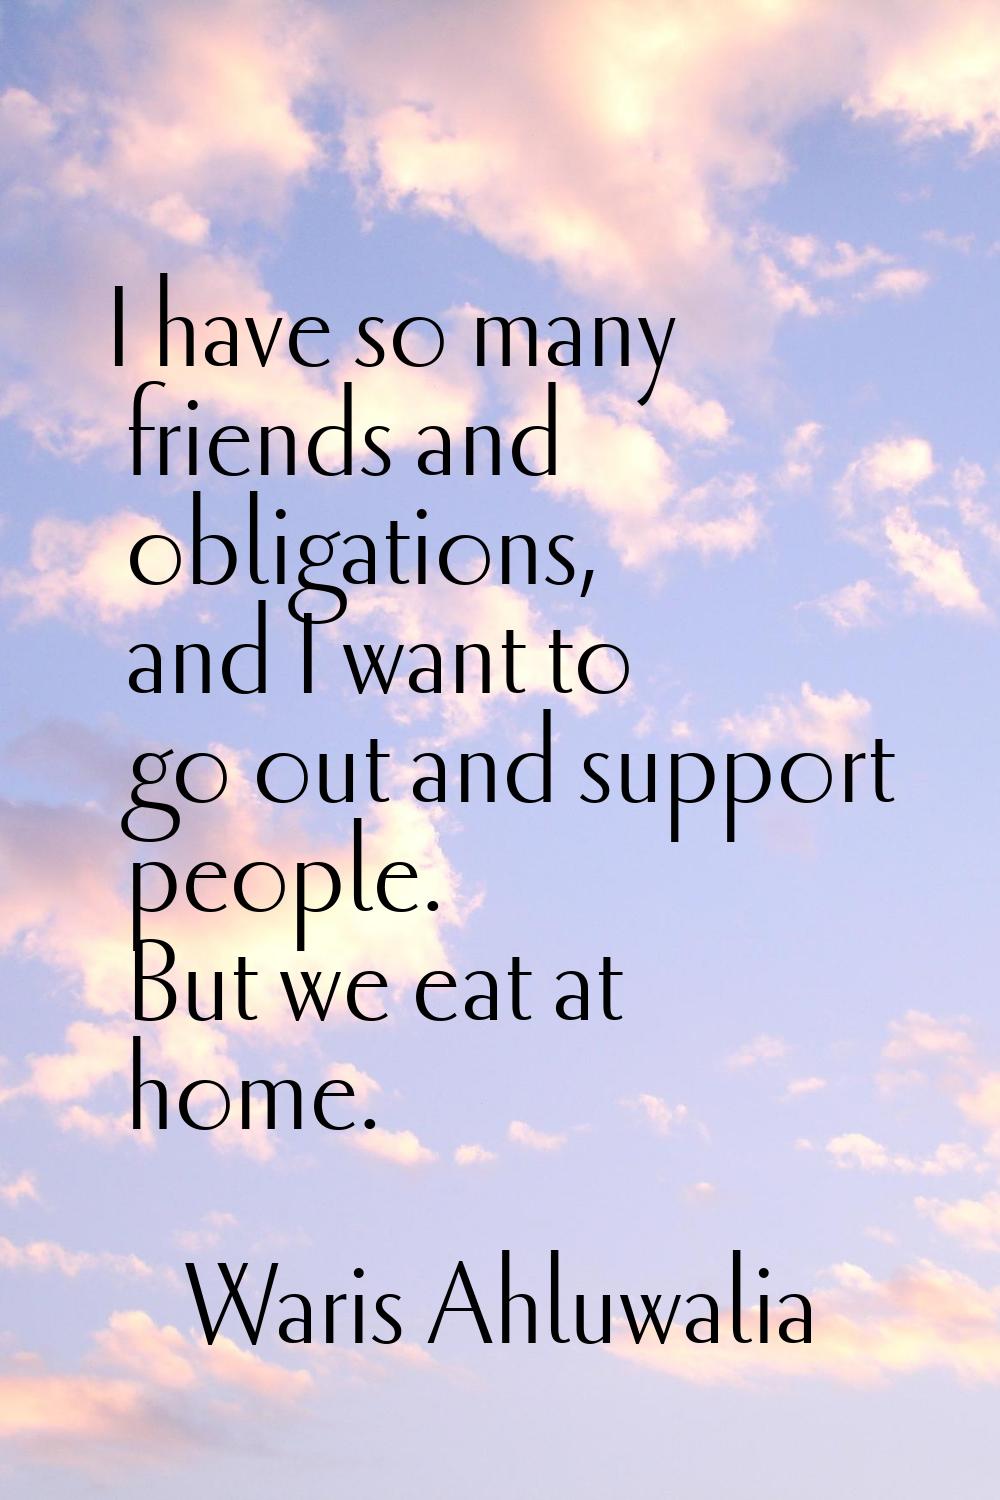 I have so many friends and obligations, and I want to go out and support people. But we eat at home